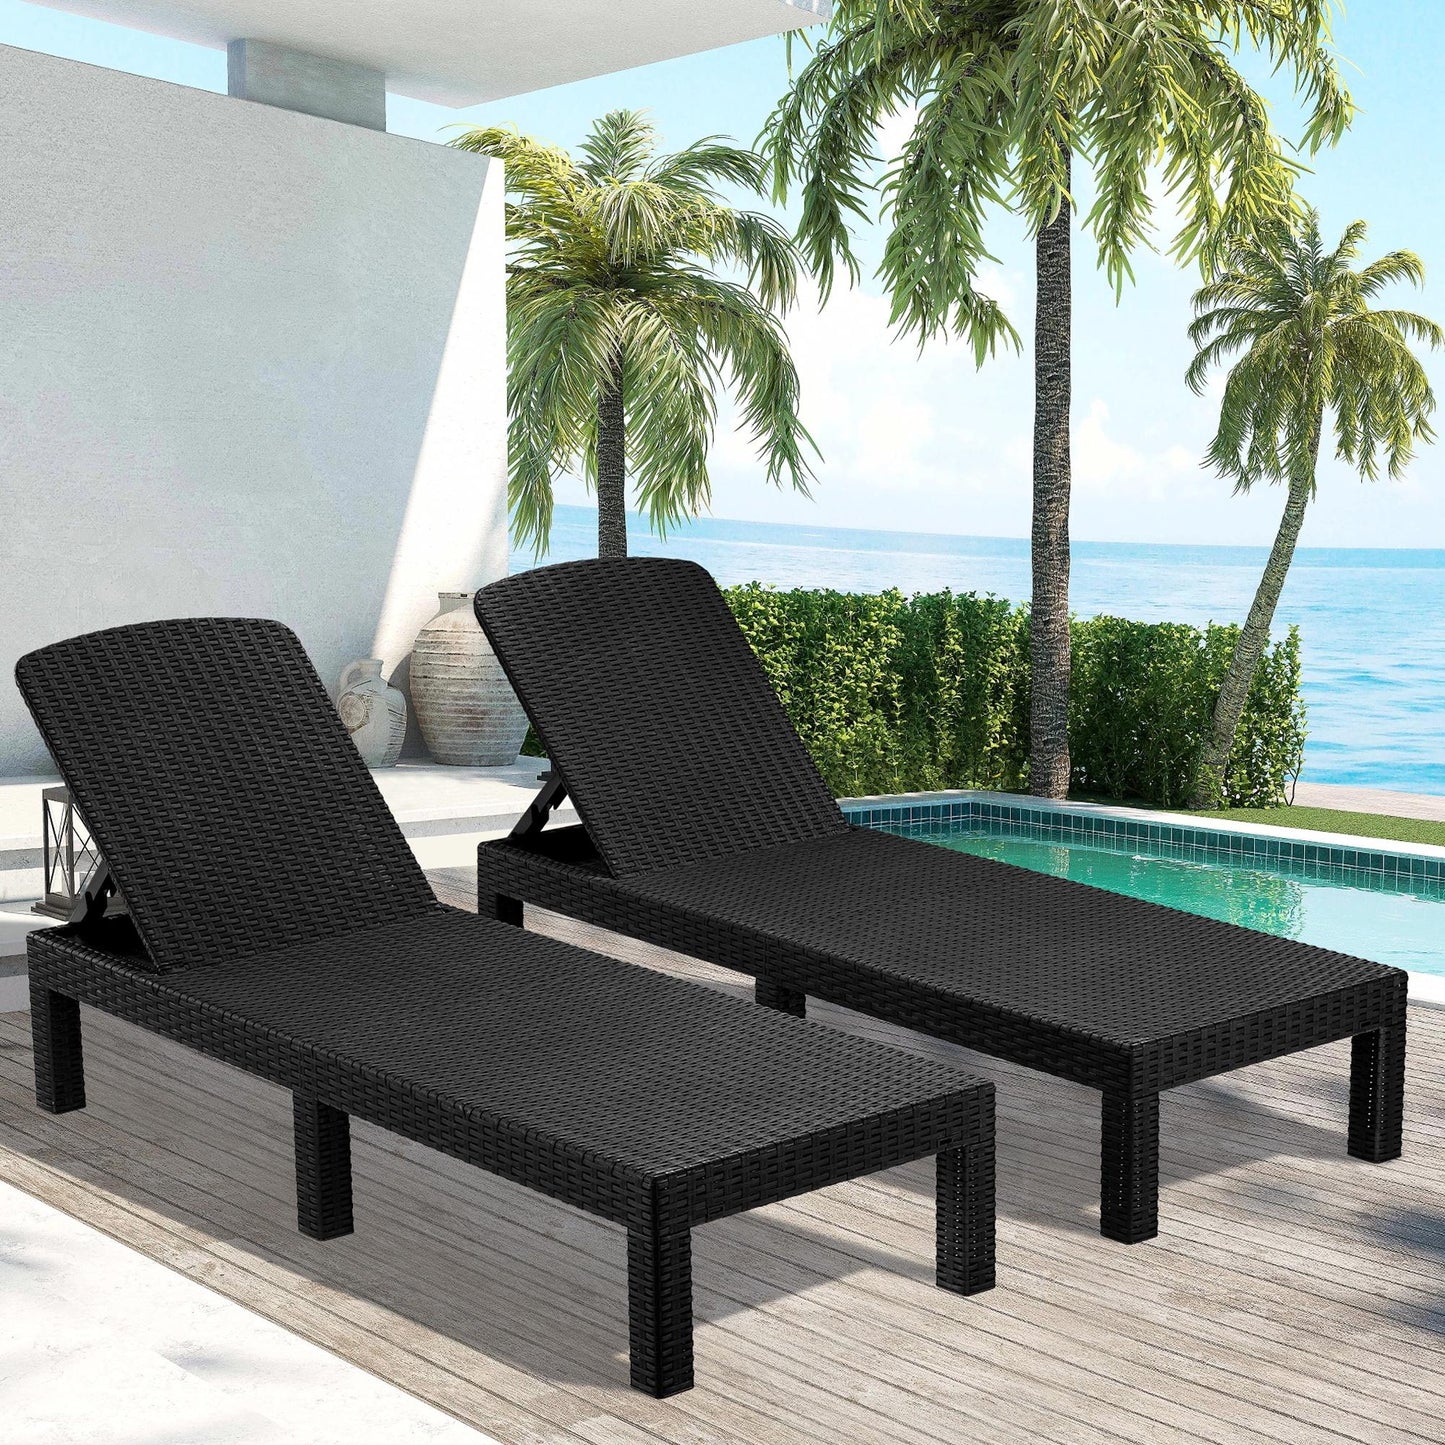 Chaise Lounge Set of 2, Patio Reclining Lounge Chairs with Adjustable Backrest, Outdoor All-Weather PP Resin Sun Loungers for Backyard, Poolside, Porch, Garden, Black